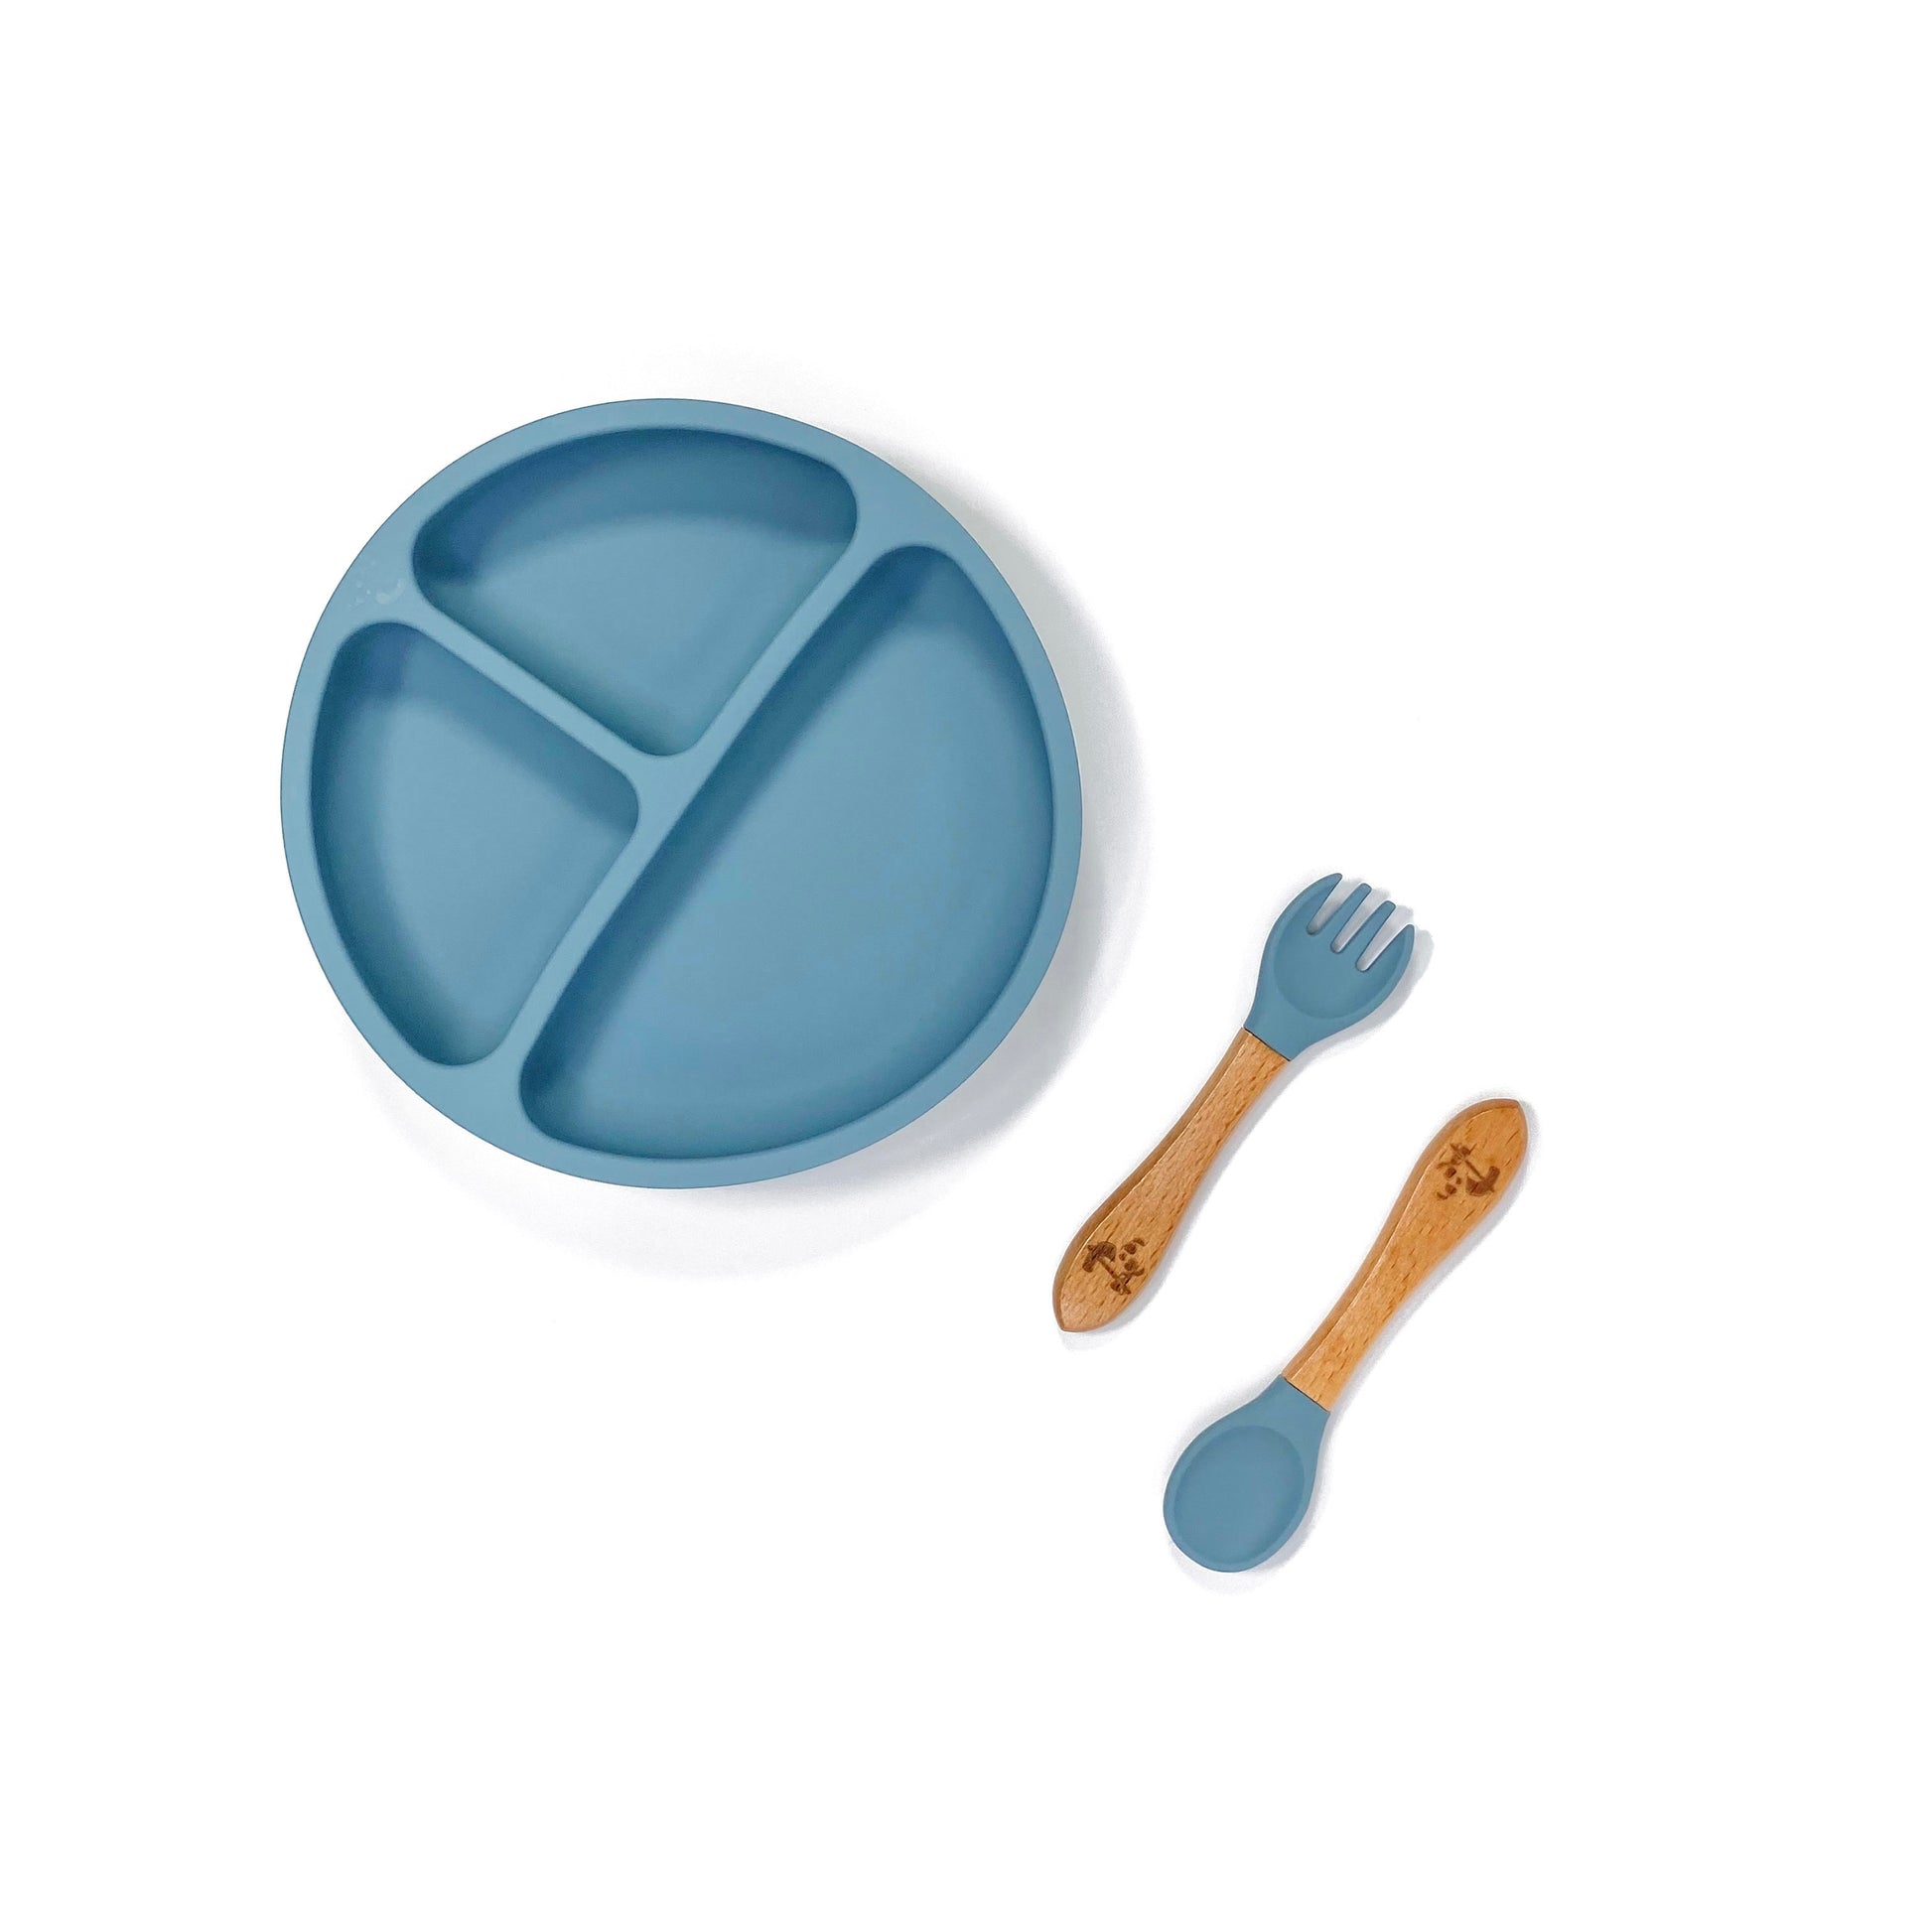 An ocean blue silicone children’s section plate with cups on the base, and matching bamboo and silicone cutlery.